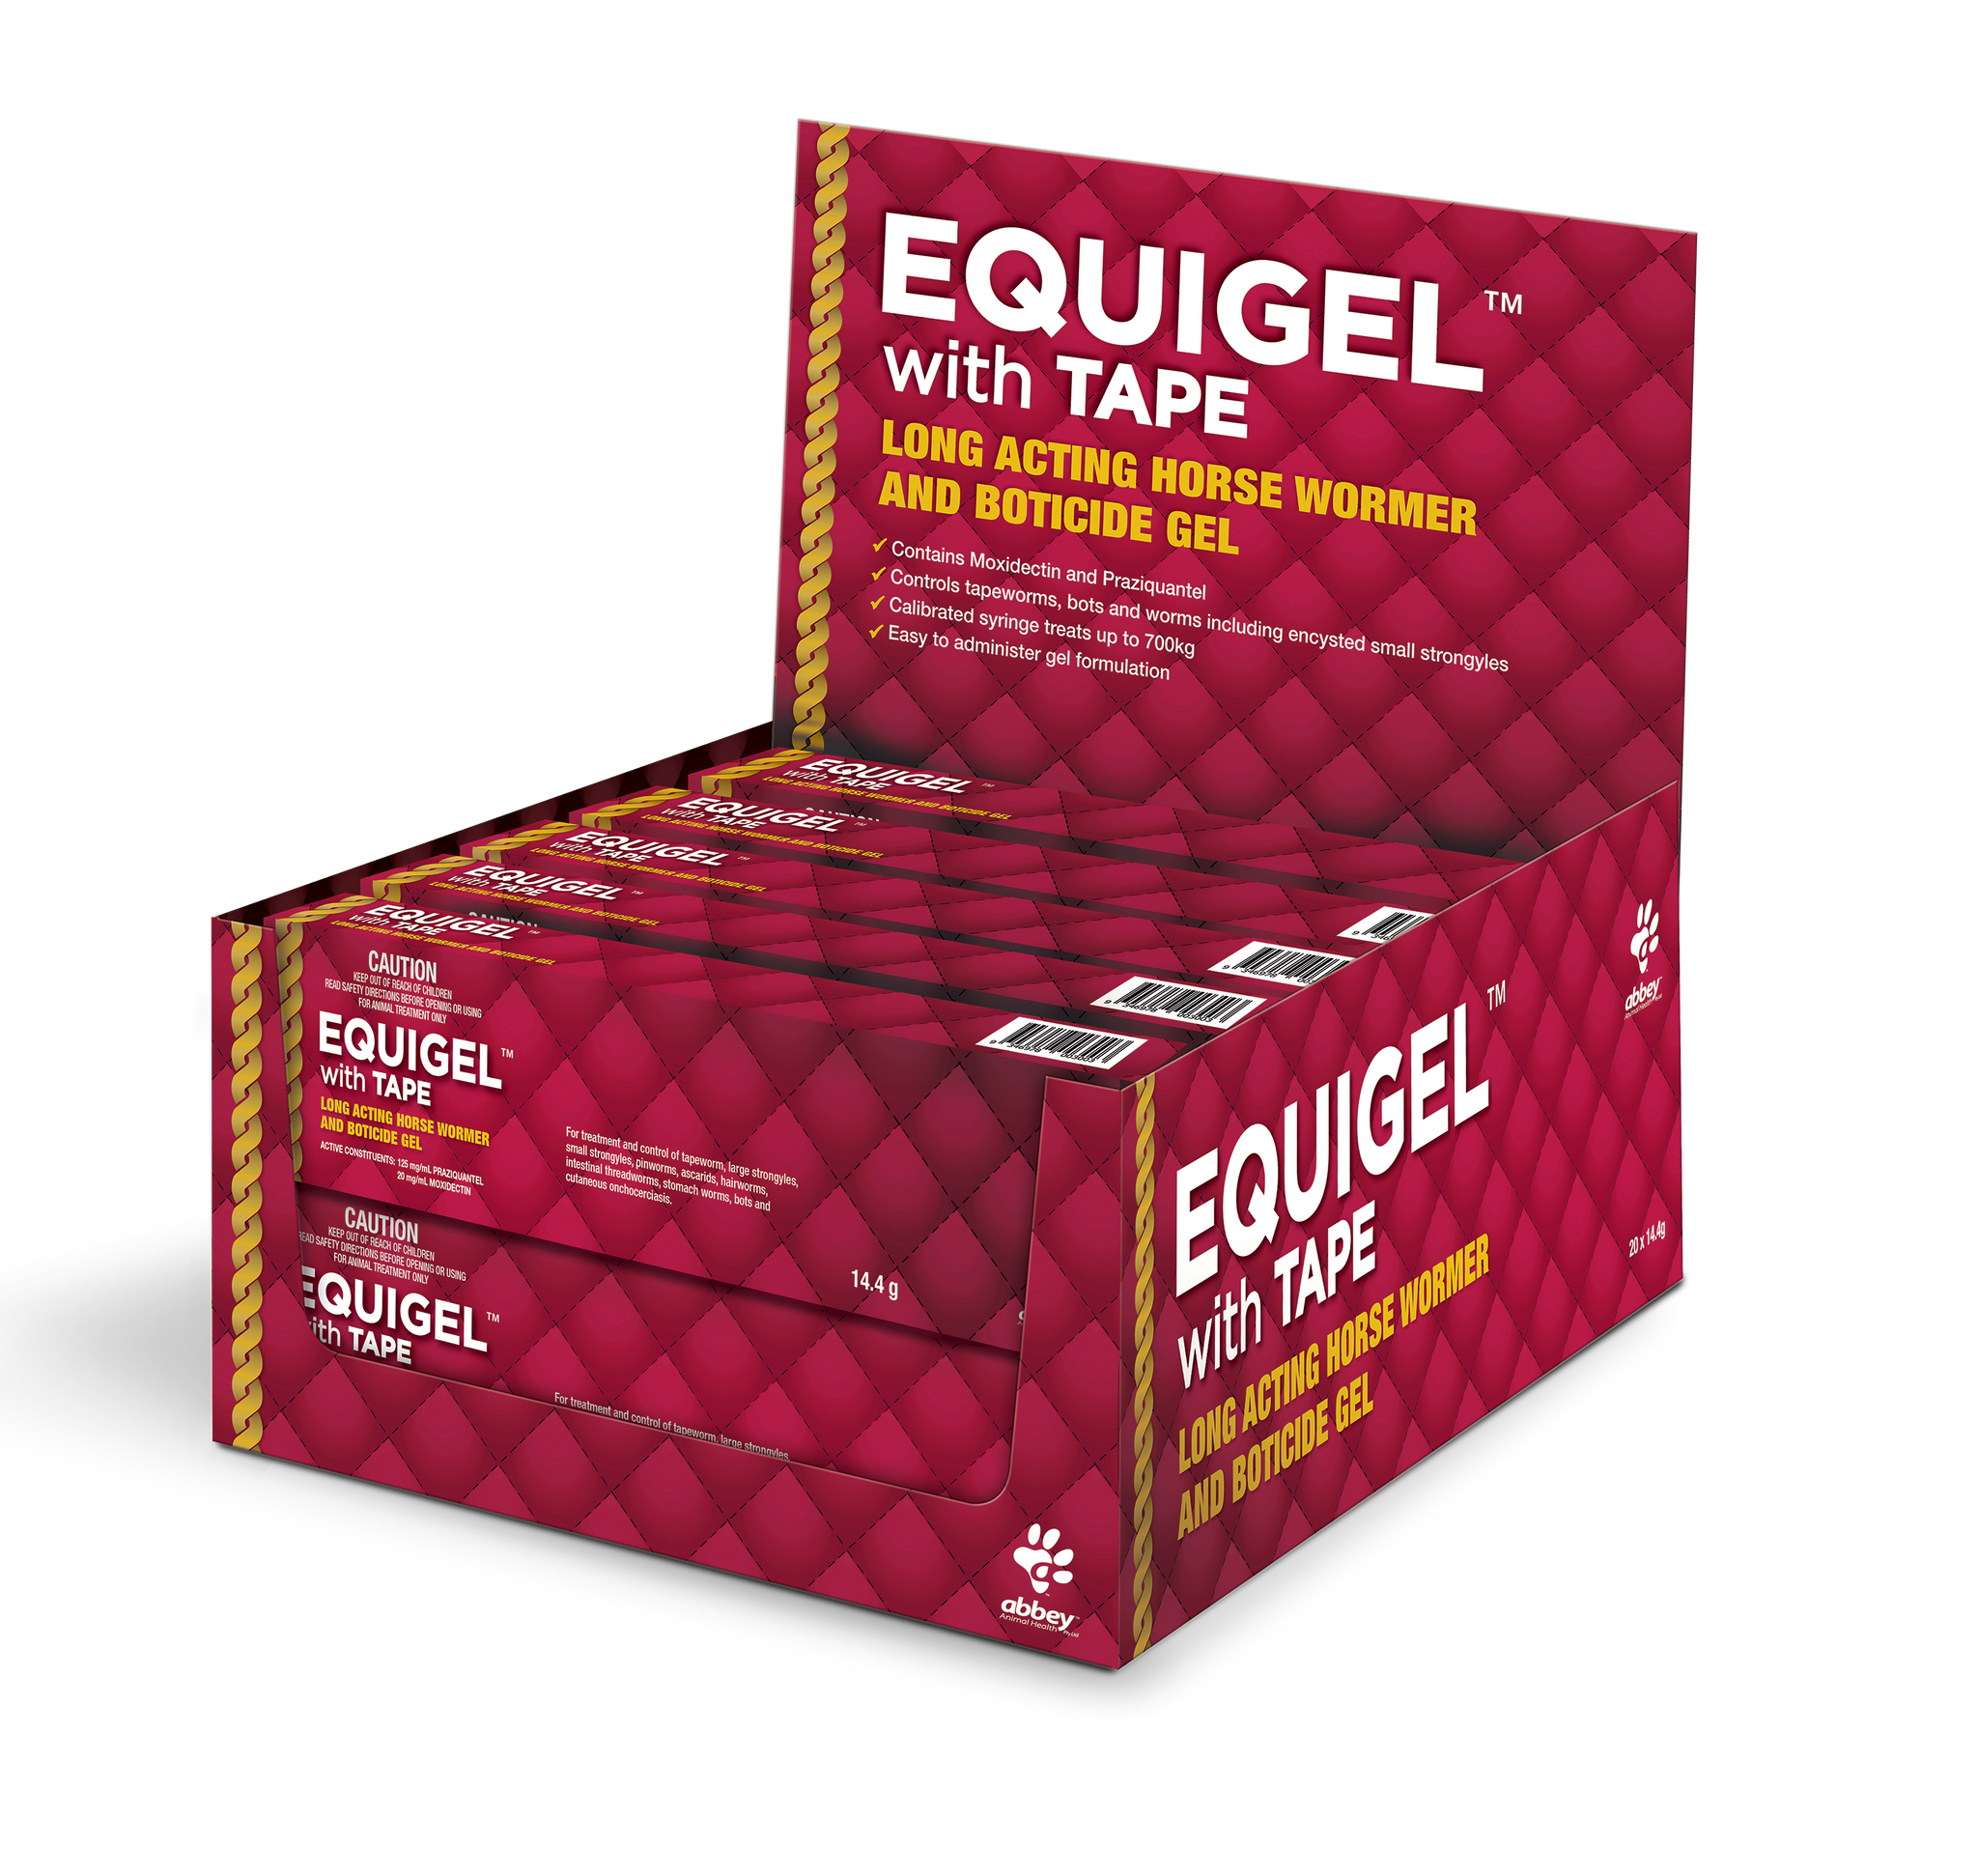 Equigel with Tape 14.4gm